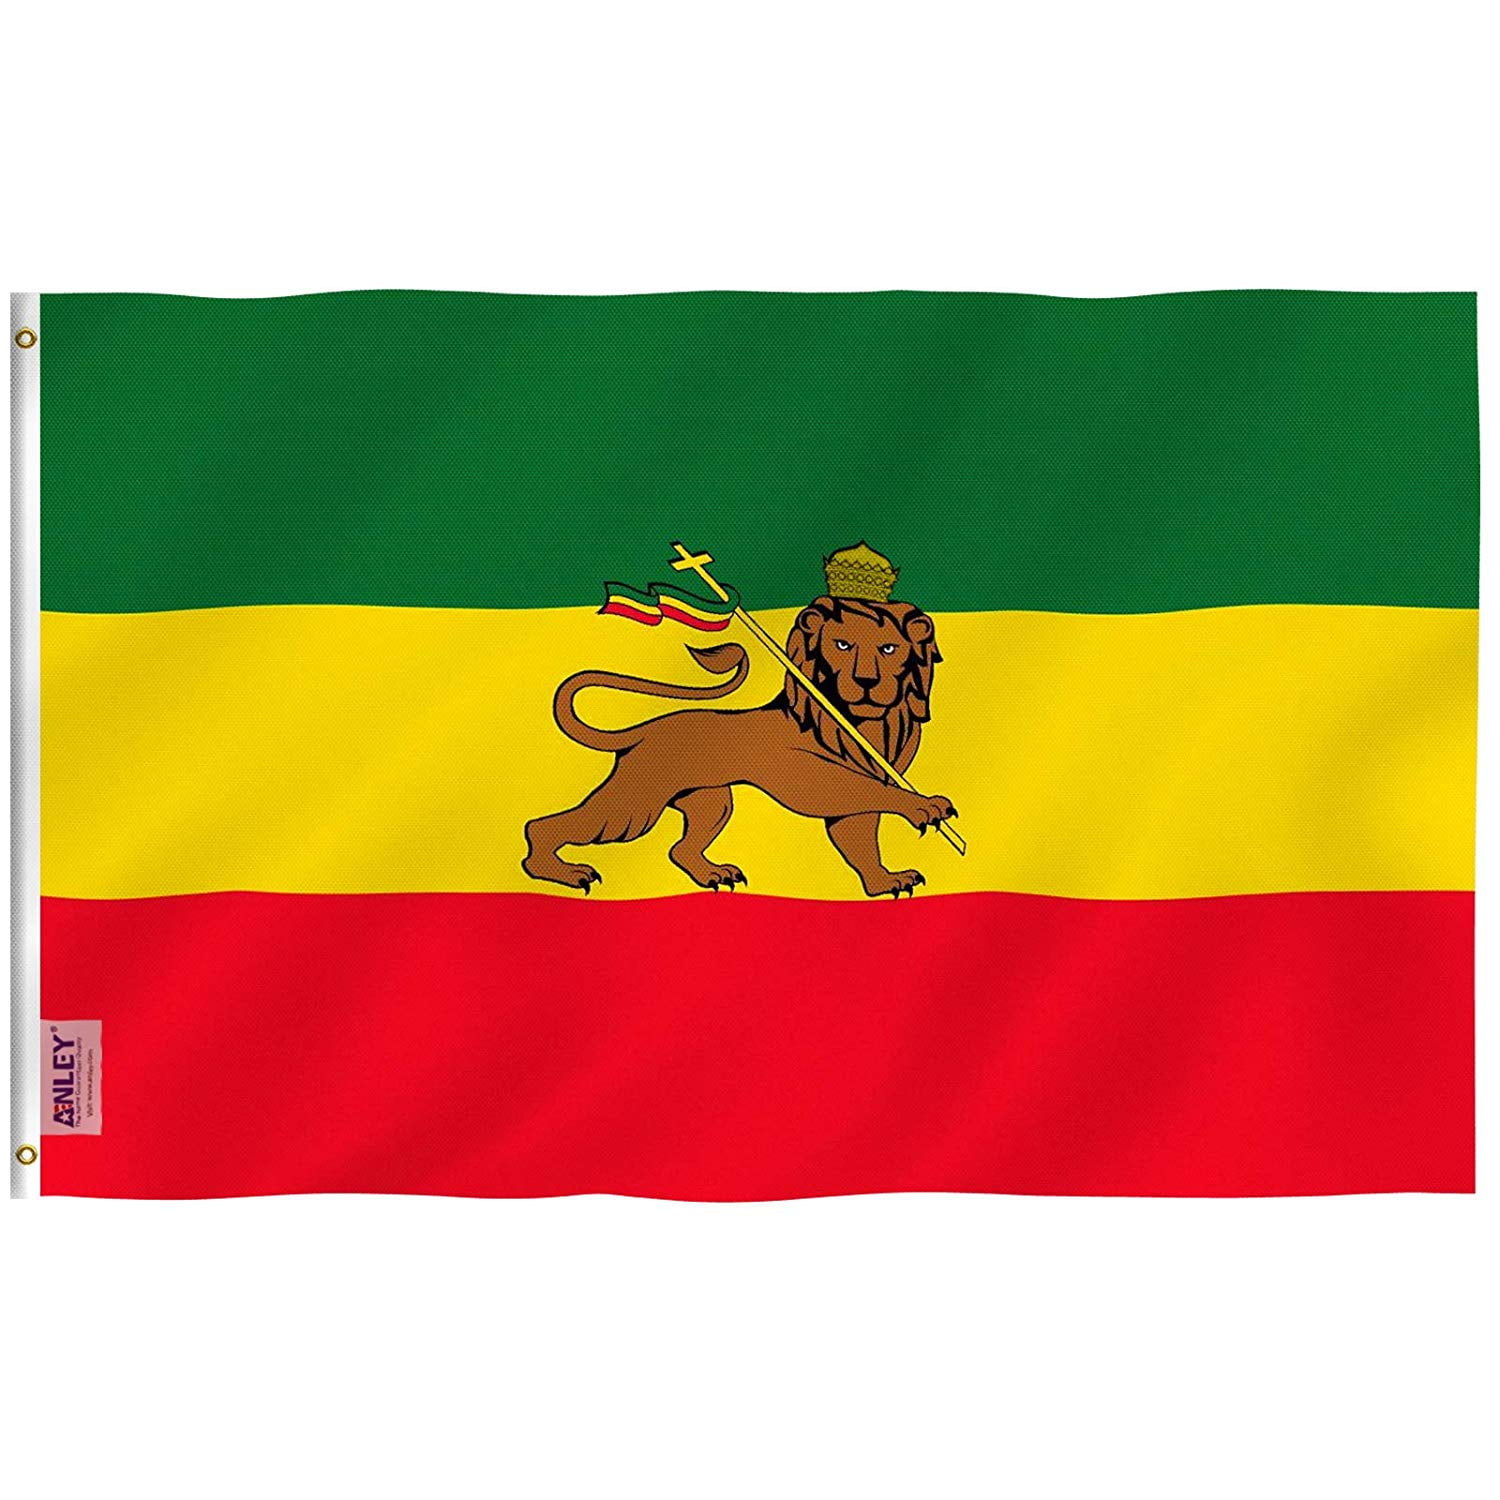 Anley Fly Breeze 3x5 Foot Ethiopia Flag with Lion - Ethiopian Lion of